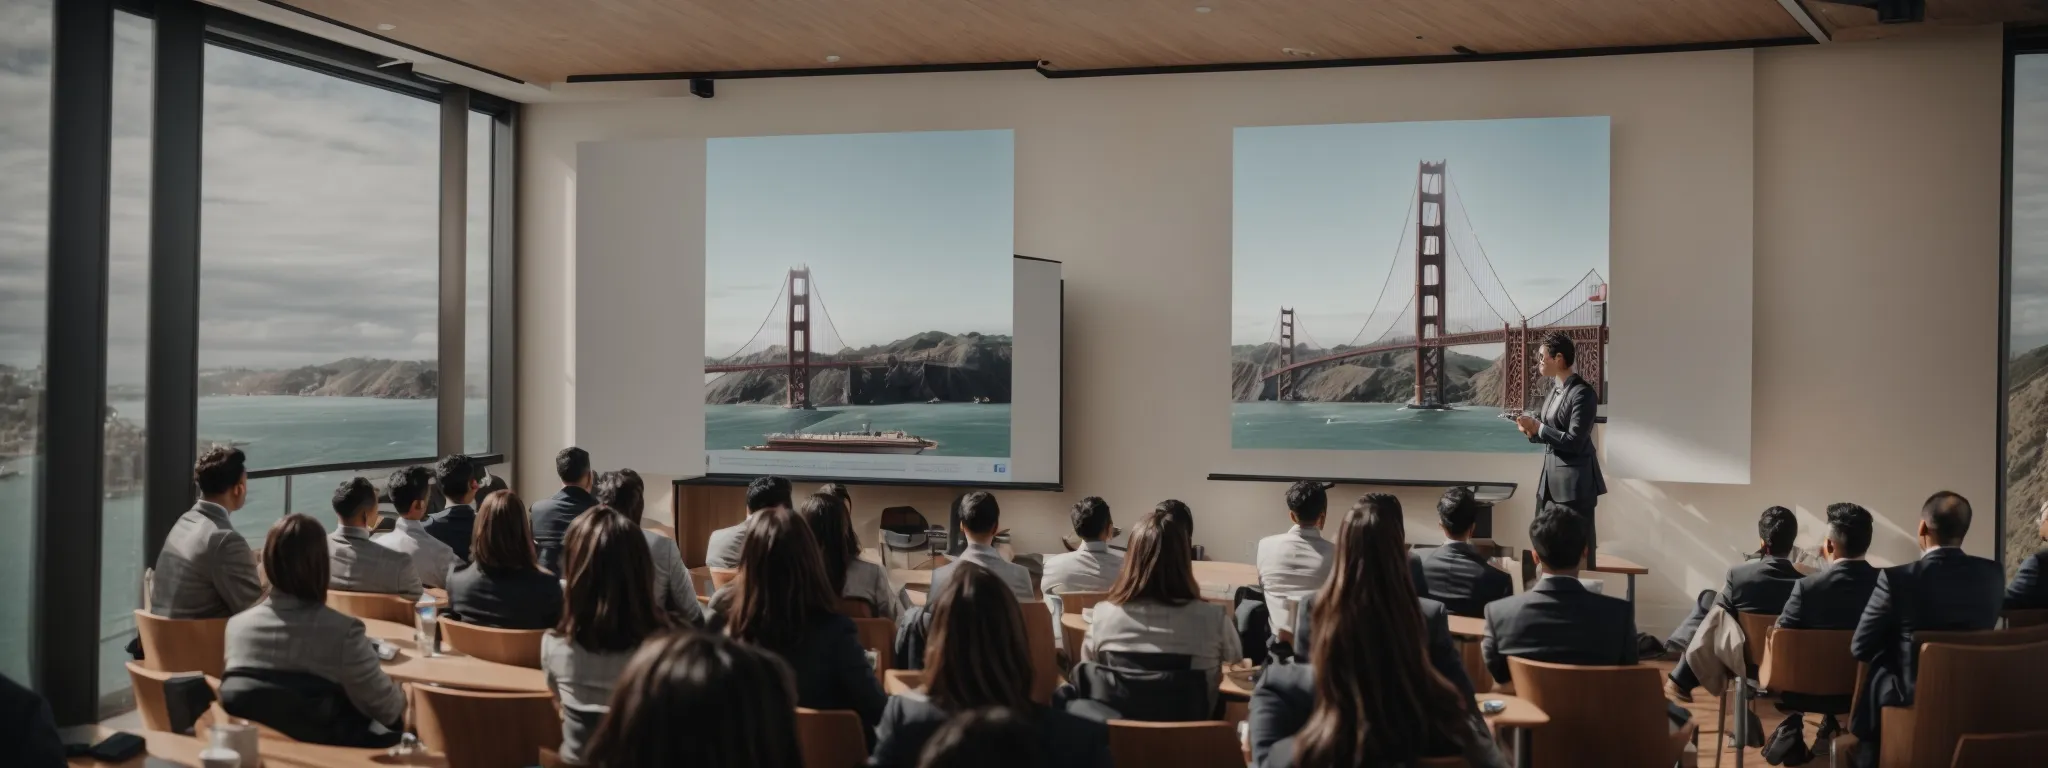 a speaker presents an seo workshop to an attentive audience with a presentation screen in the background, in a conference room with a view of the golden gate bridge.